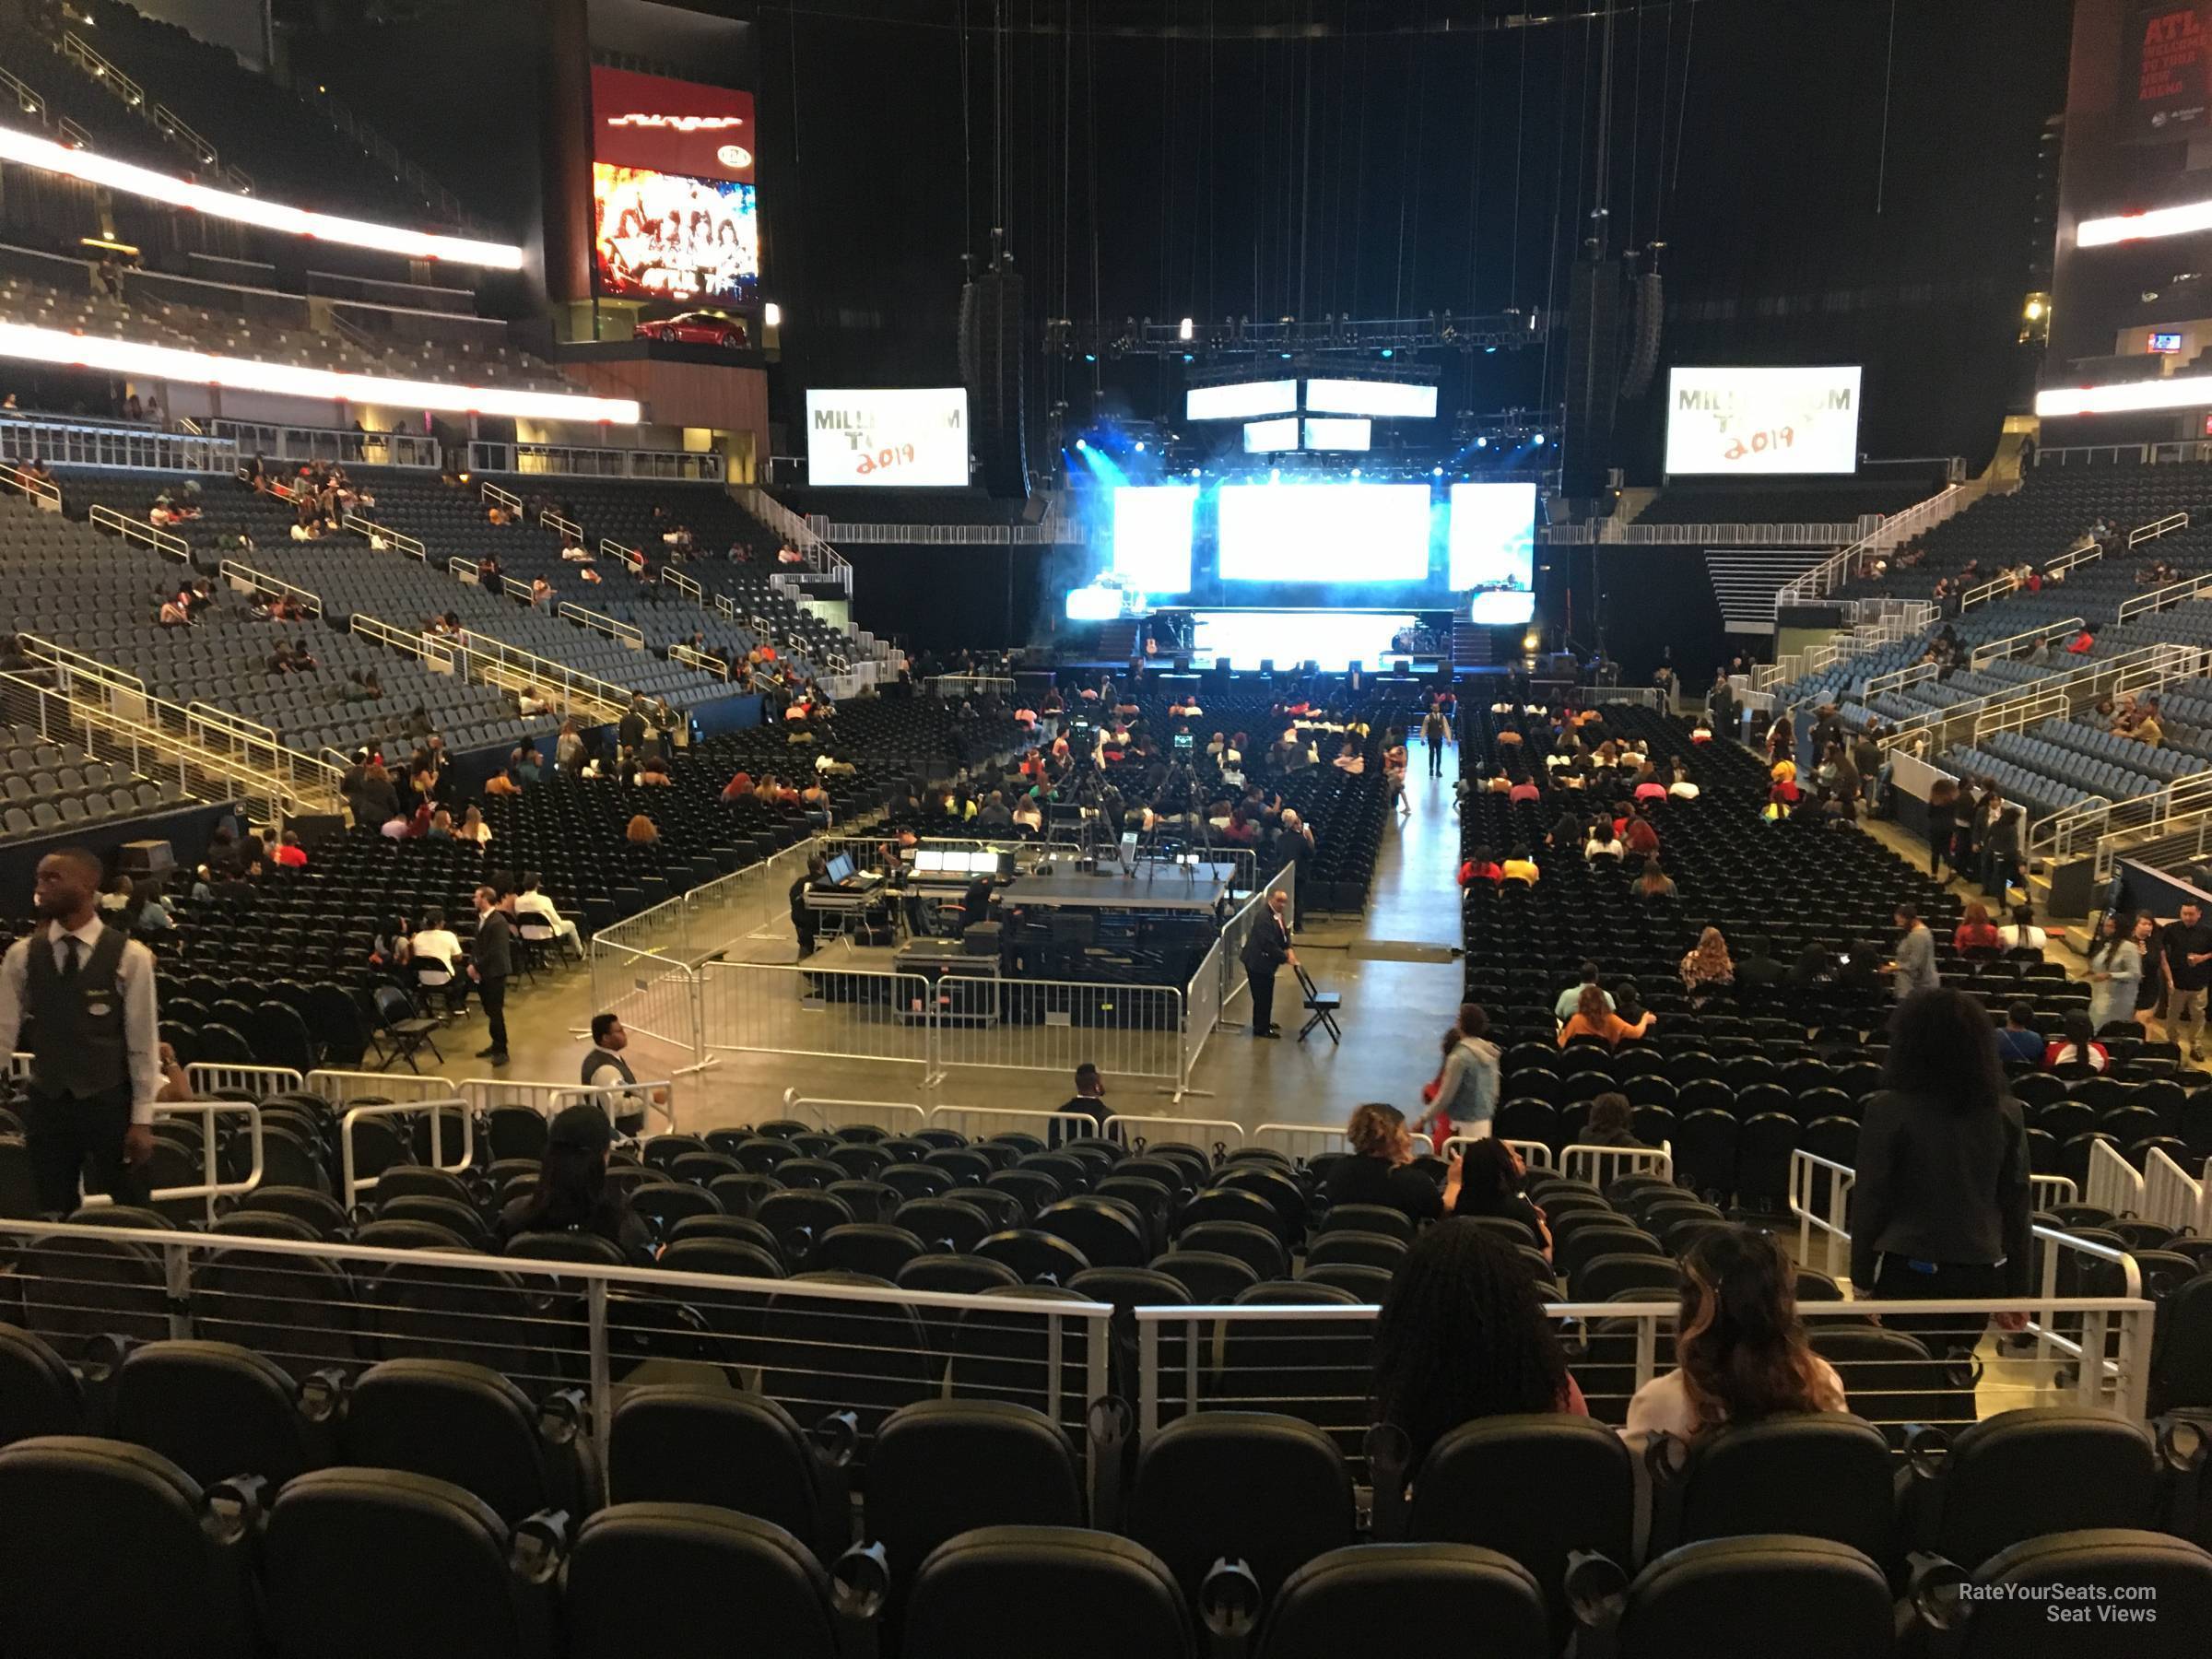 State Farm Arena Section 113 Concert Seating - RateYourSeats.com